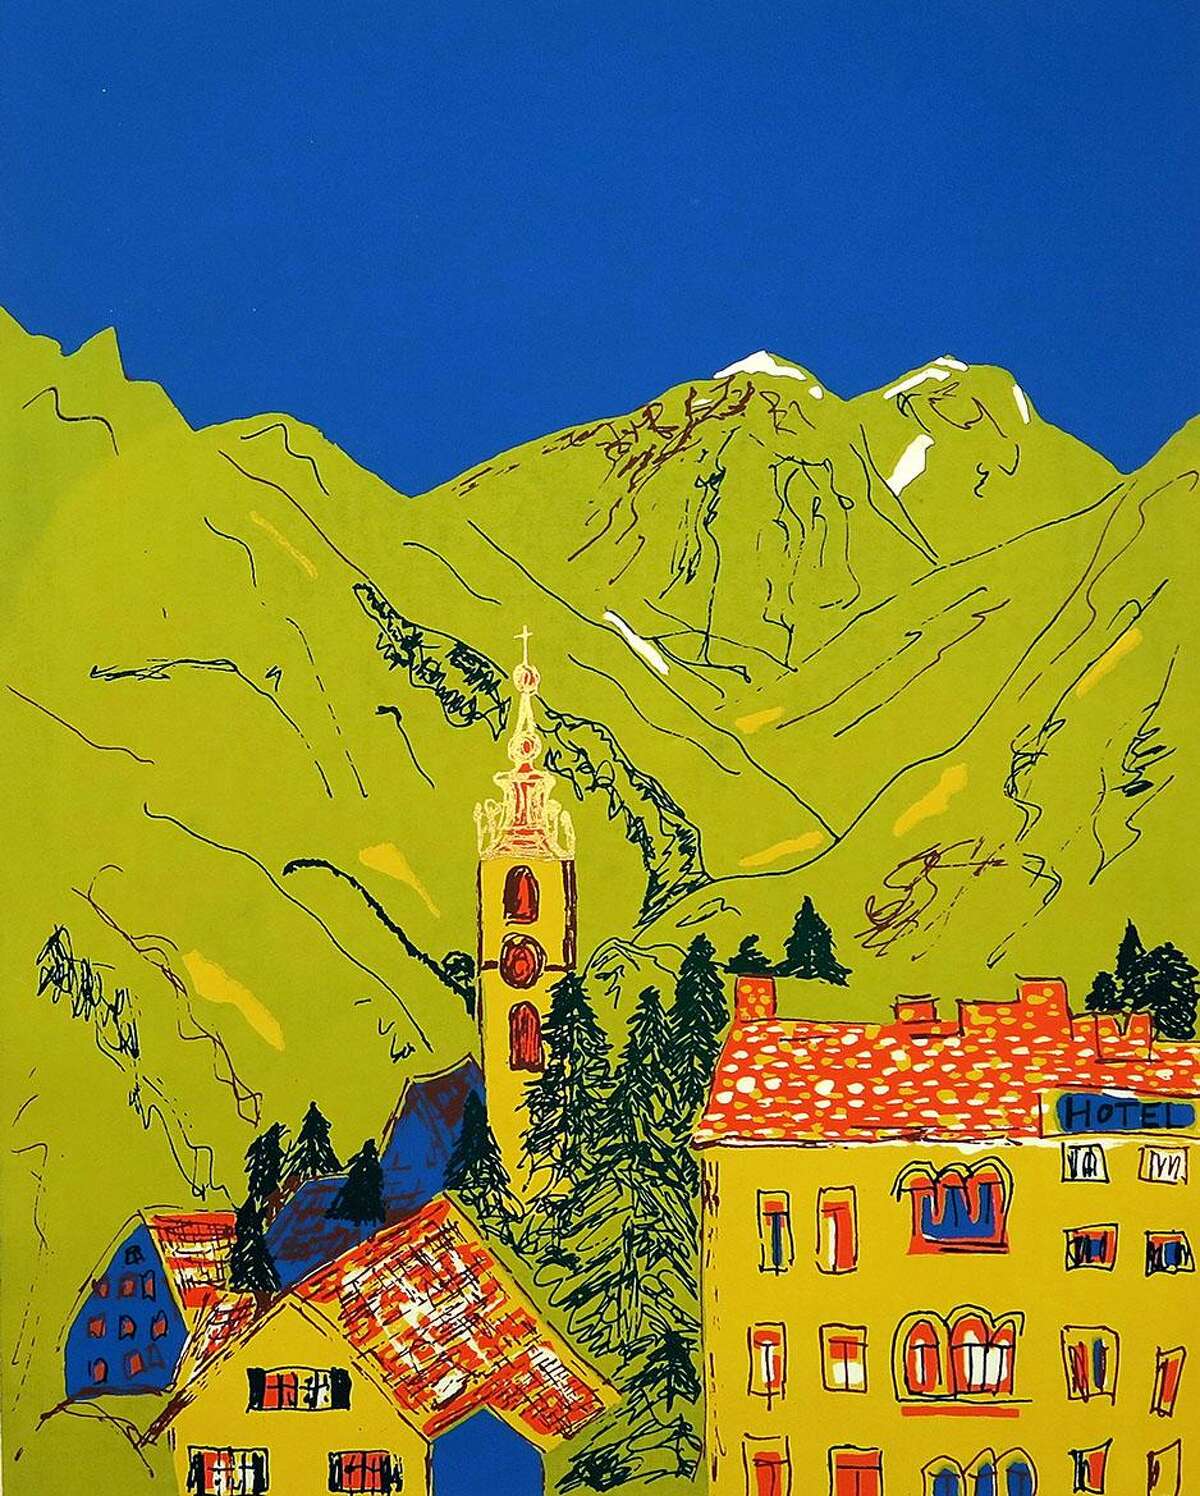 Kent Memorial Library will present an exhibit, “Then and Now,” featuring works by South Kent artist Thomas Franken May 1 through June 30. An opening reception with the artist will be held May 13 from 2 to 4 p.m. The show will feature a retrospective of more than 50 years of his artwork. Above is Andermatt Day Ori.